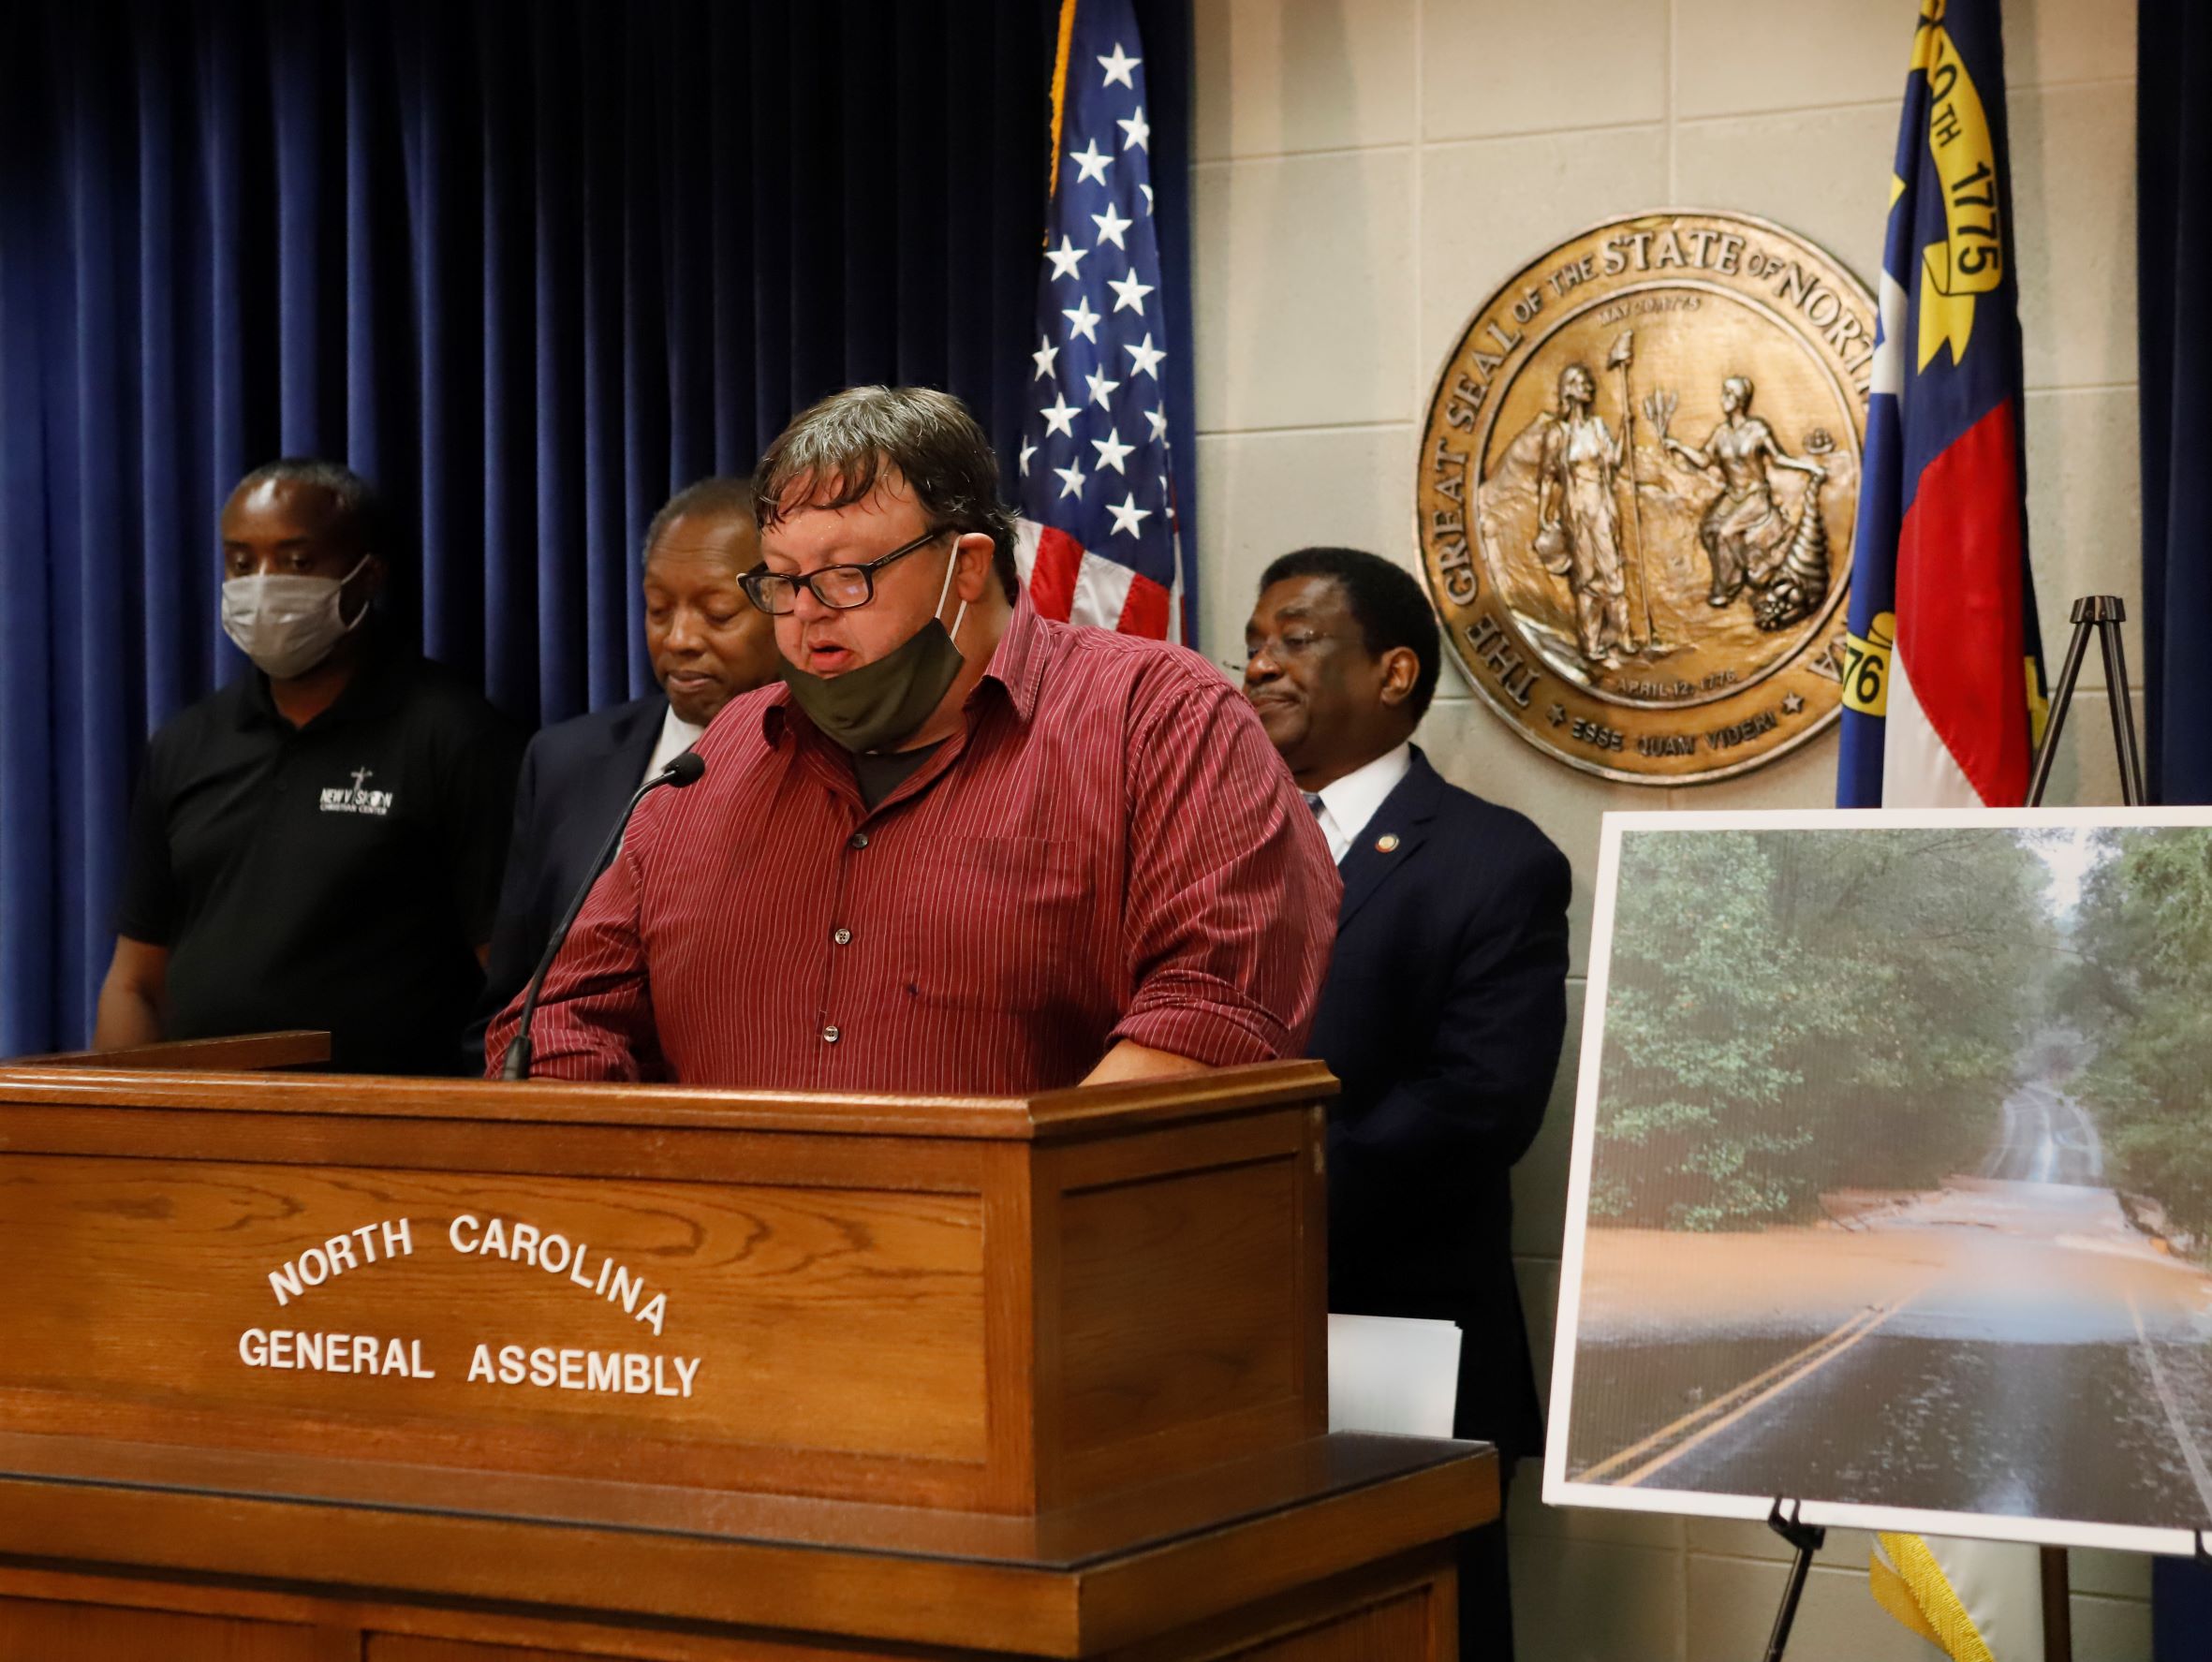 Jefferson Curie speaking at a press conference in Raleigh demanding wood pellet subsidies stop.